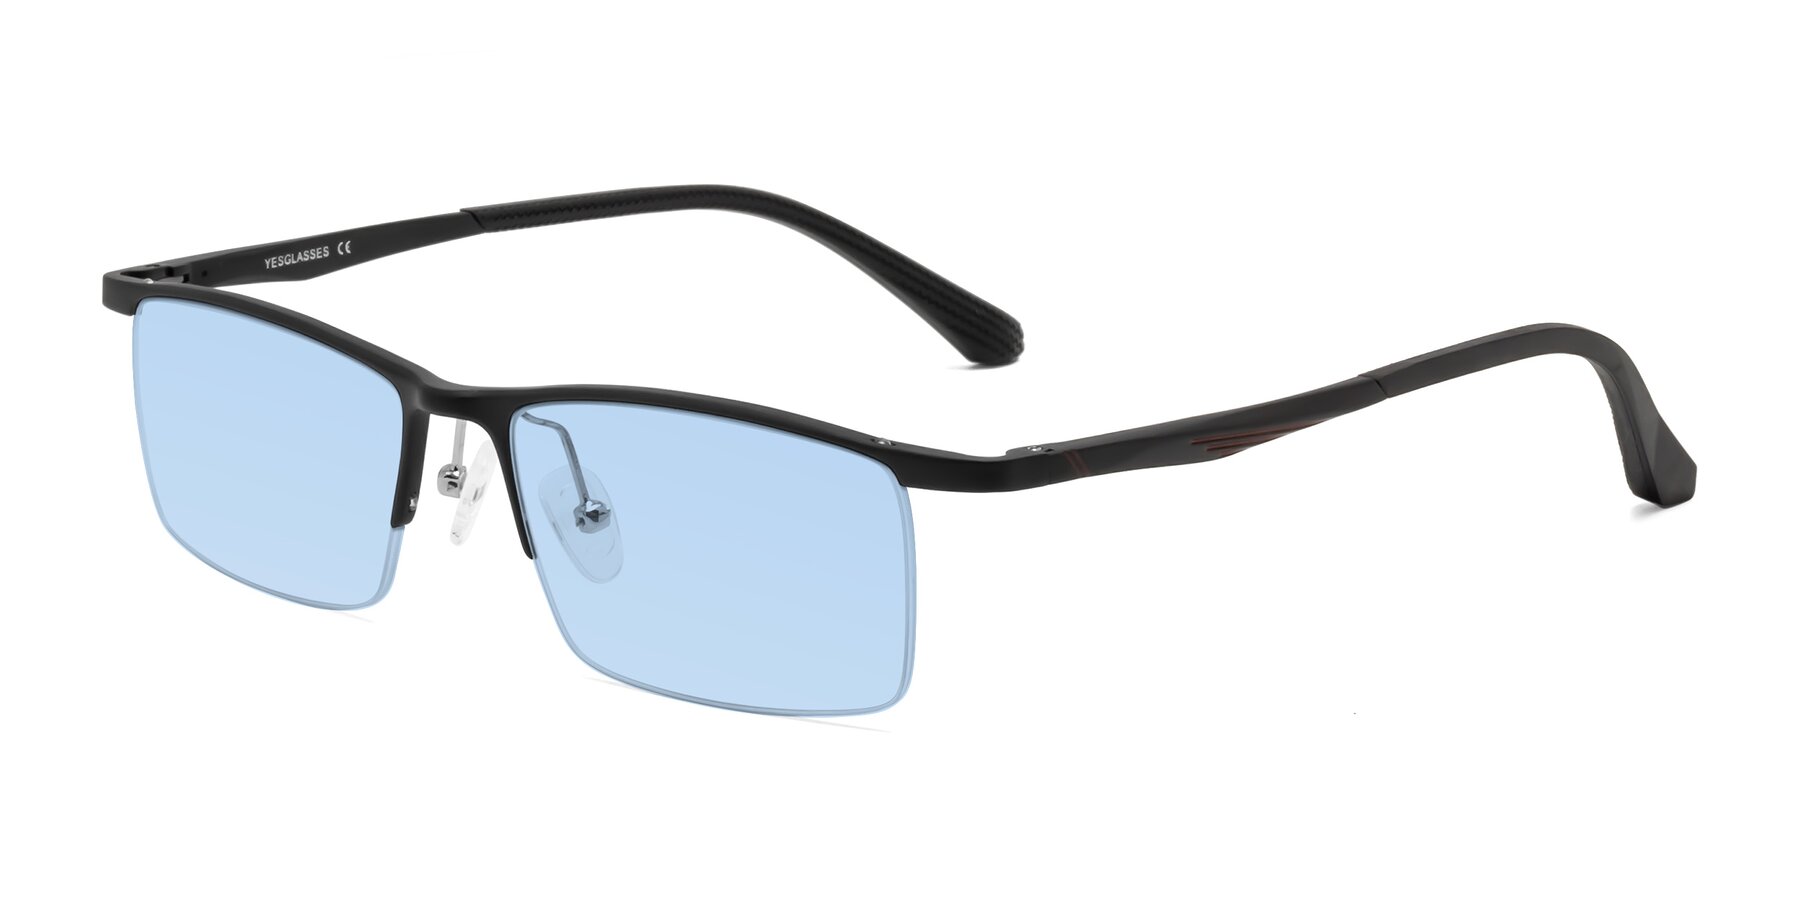 Angle of CX6236 in Black with Light Blue Tinted Lenses